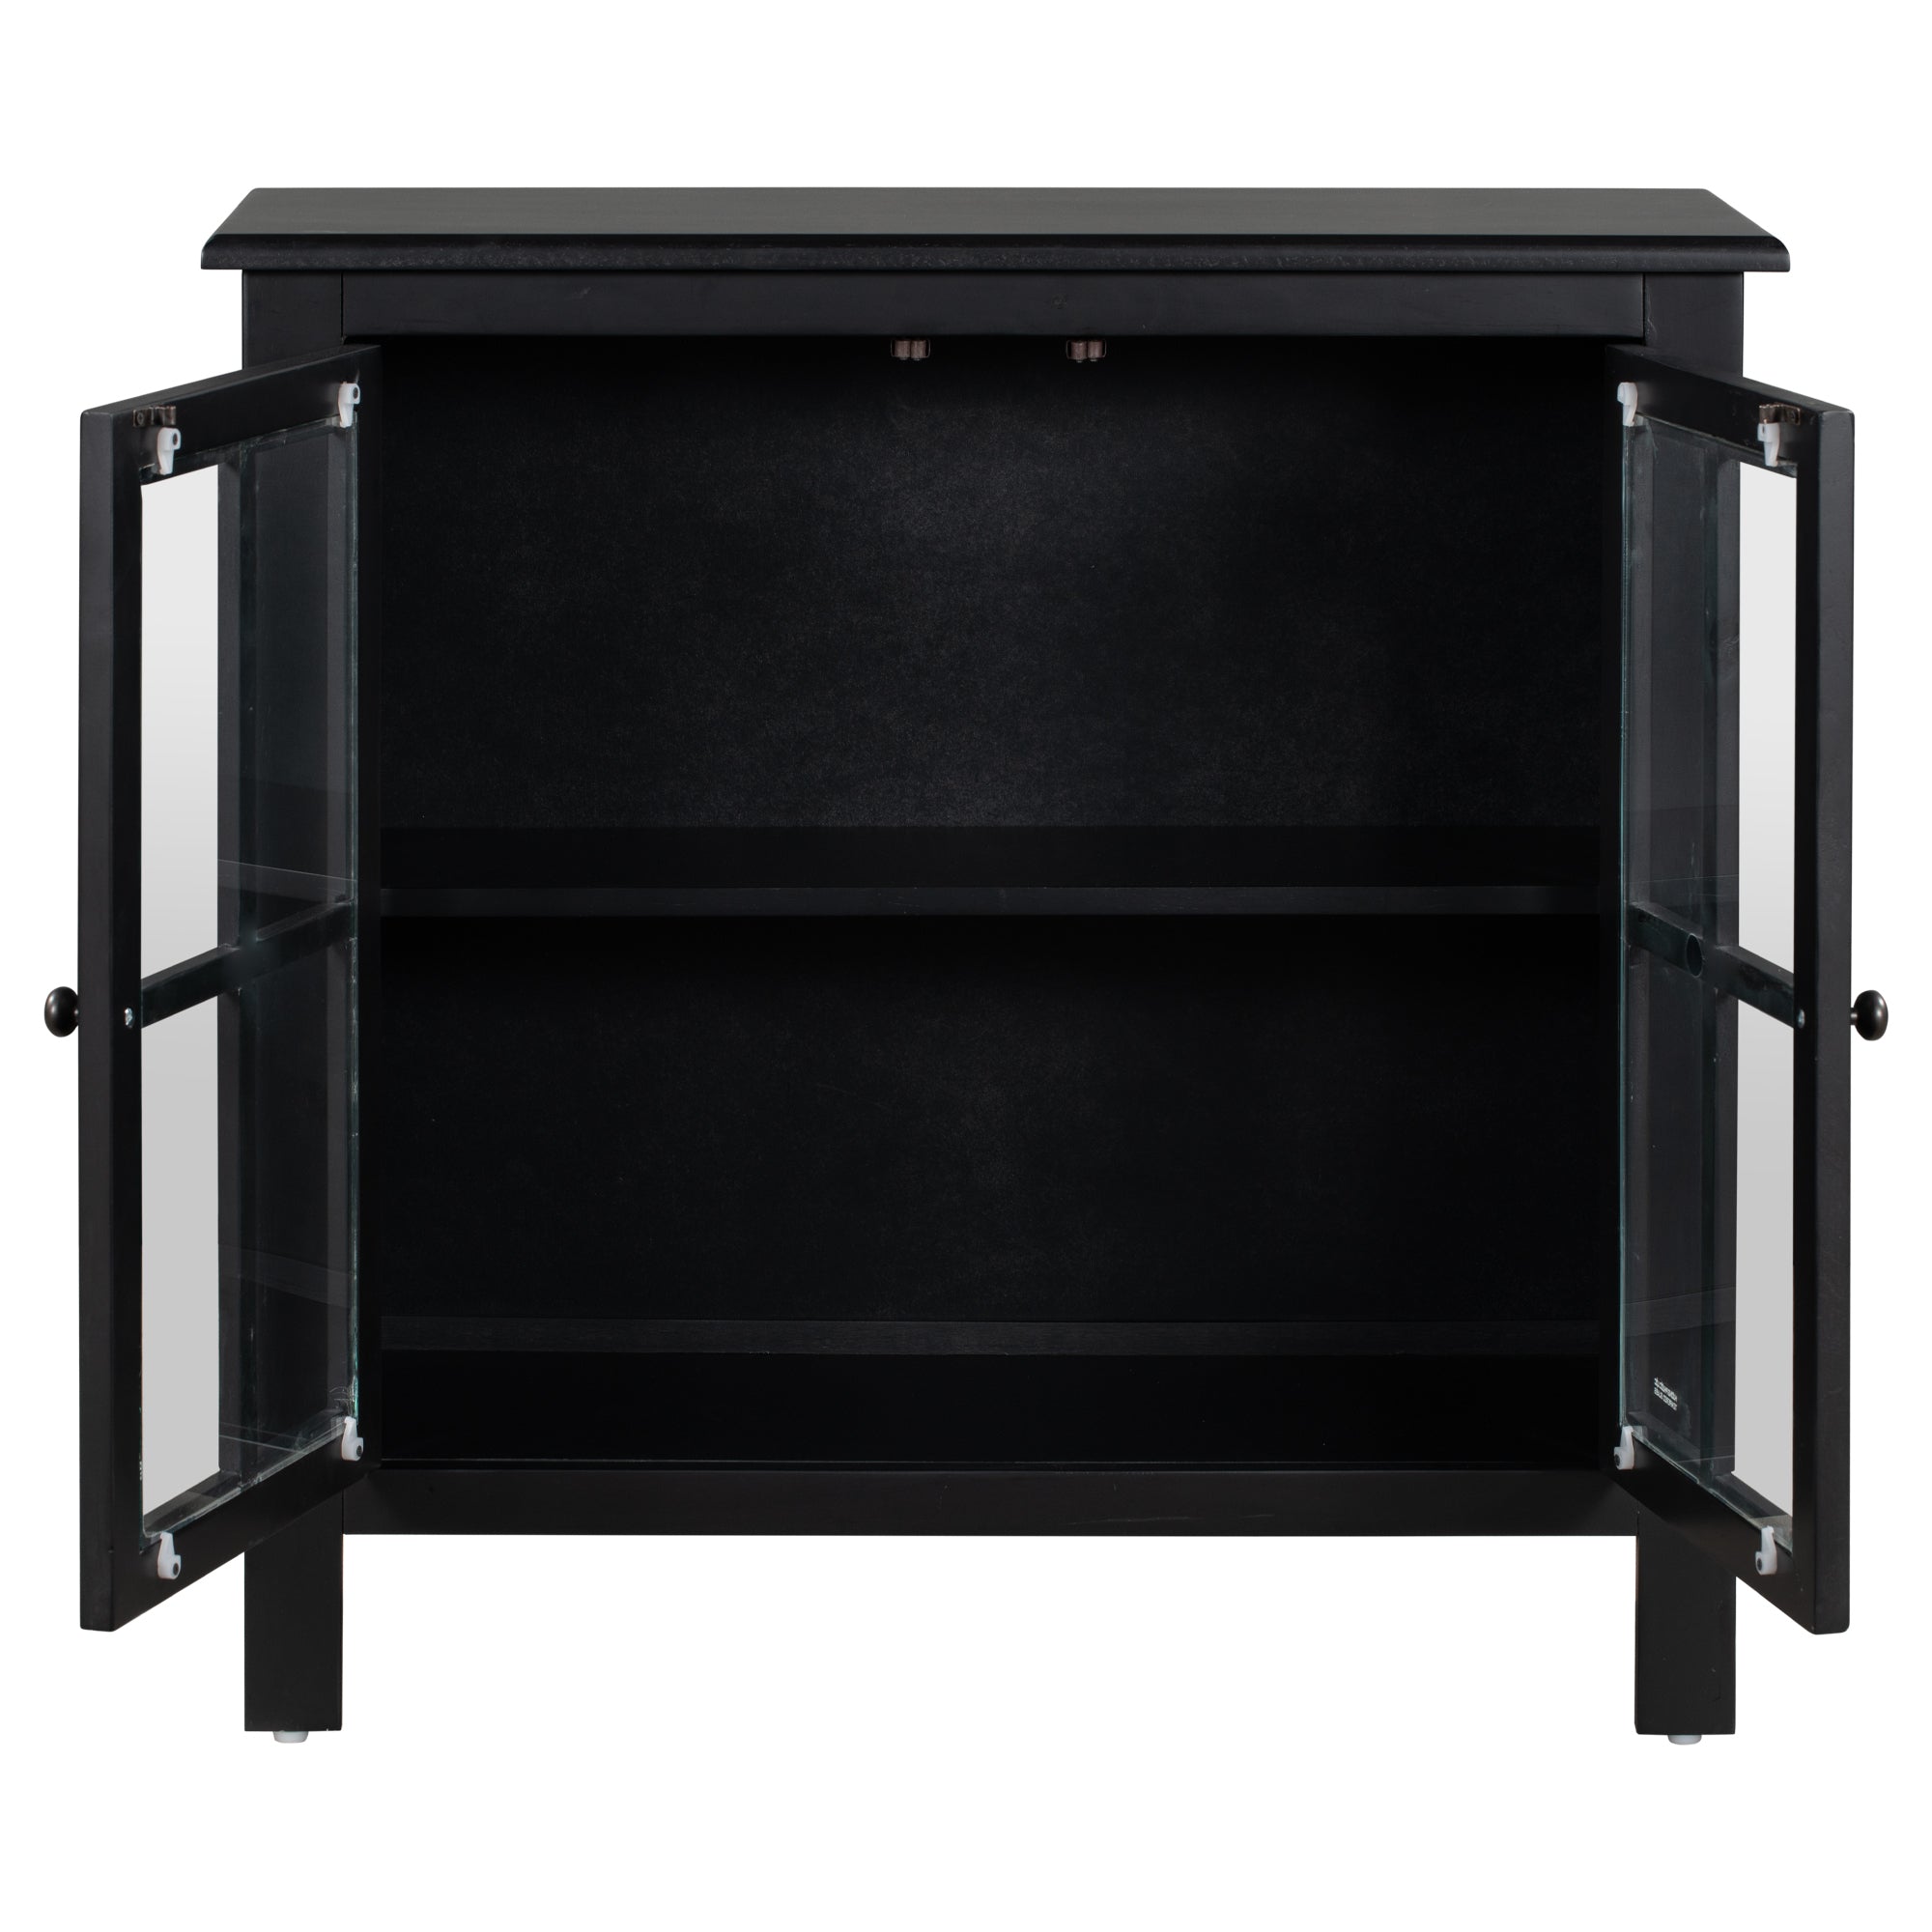 31.5’’ Wood Accent Buffet Sideboard Storage Cabinet with Doors and Adjustable Shelf (Black)